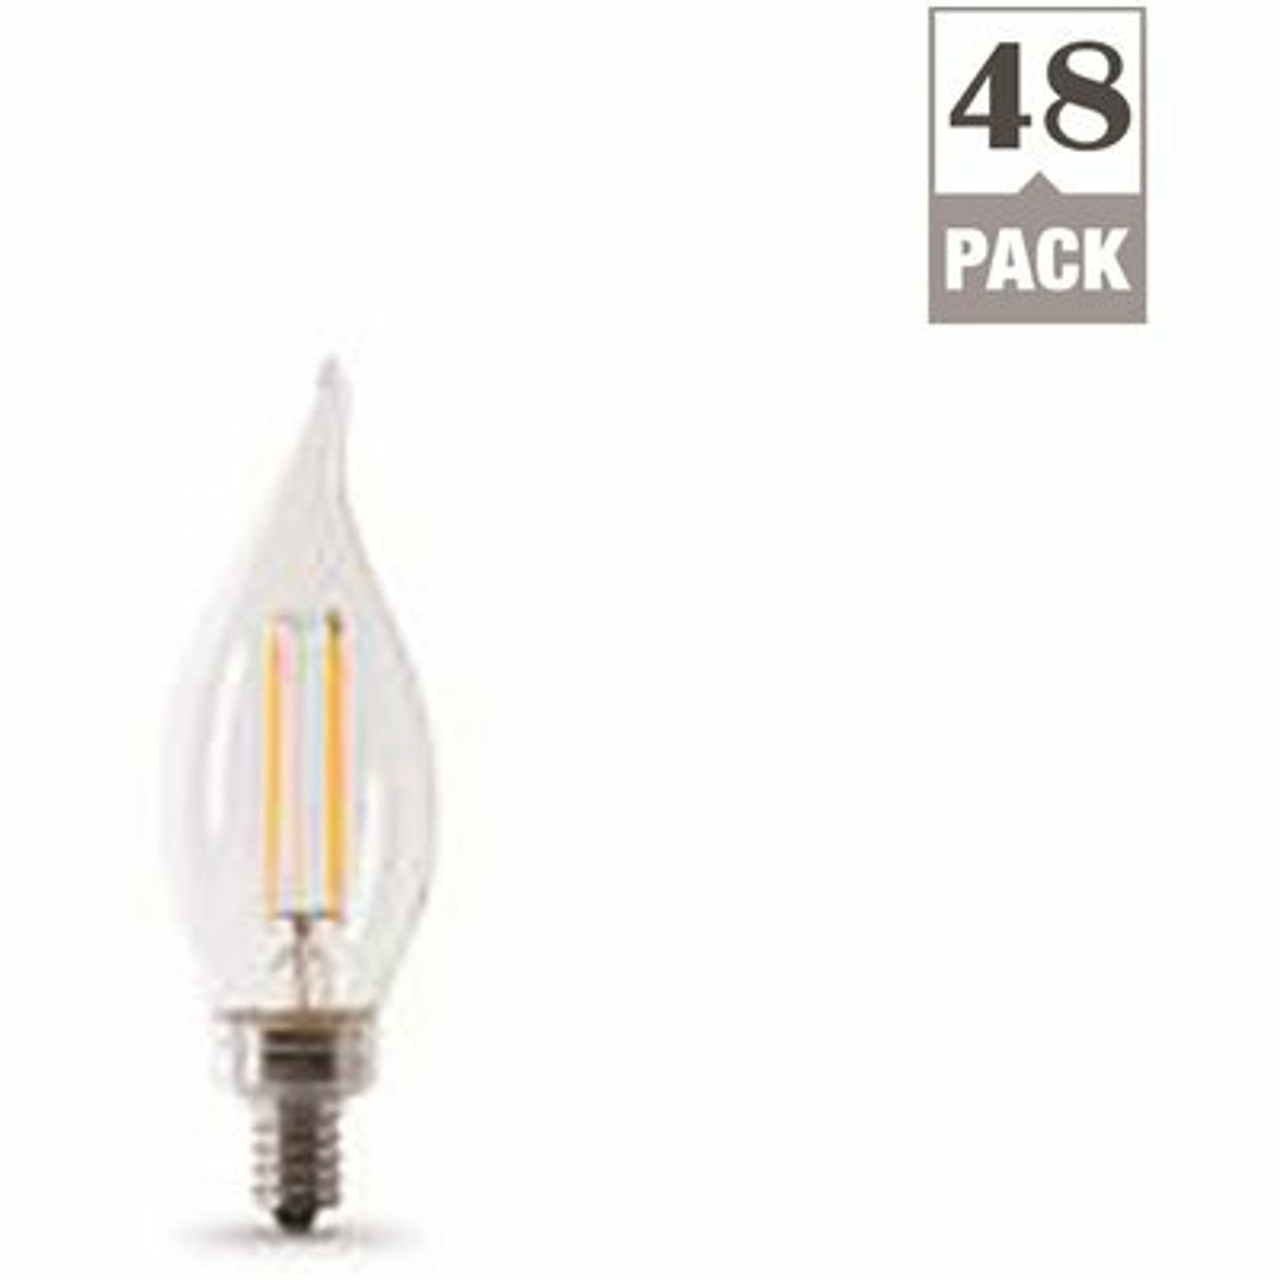 40-Watt Equivalent Ca10 Candelabra Dimmable Filament Cec Clear Glass Chandelier Led Light Bulb, Soft White (48-Pack)